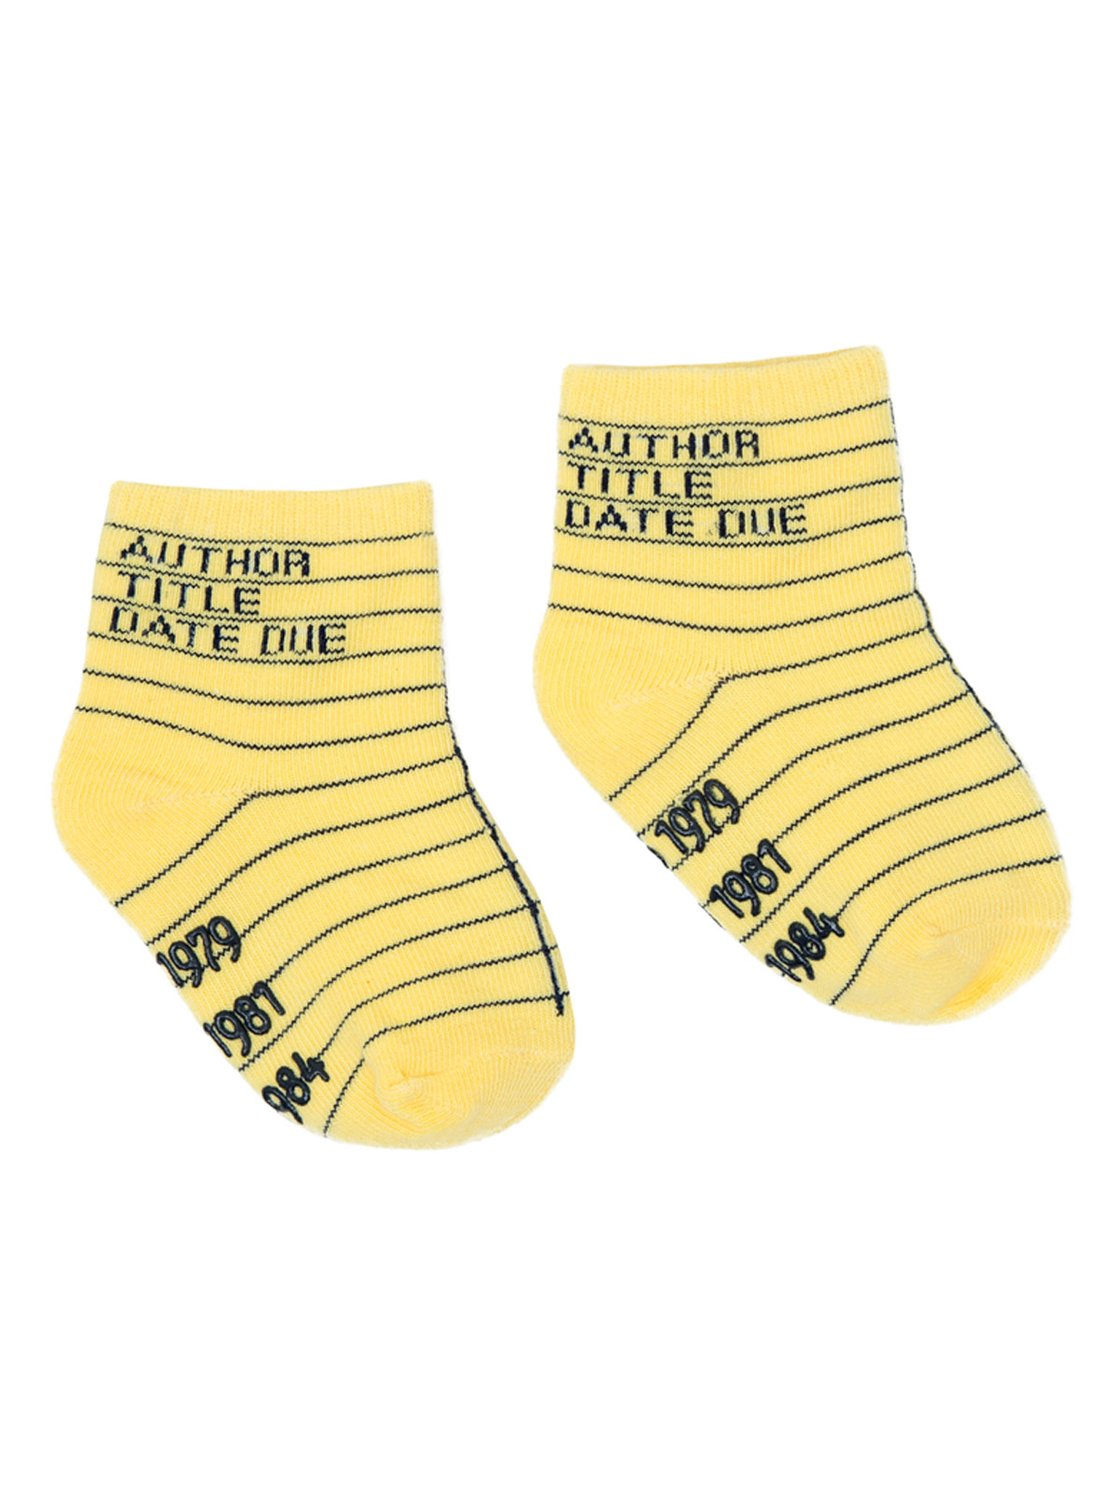 These kid's cotton crew socks in yellow by the brand Out of Print feature the iconic library card design with the words 